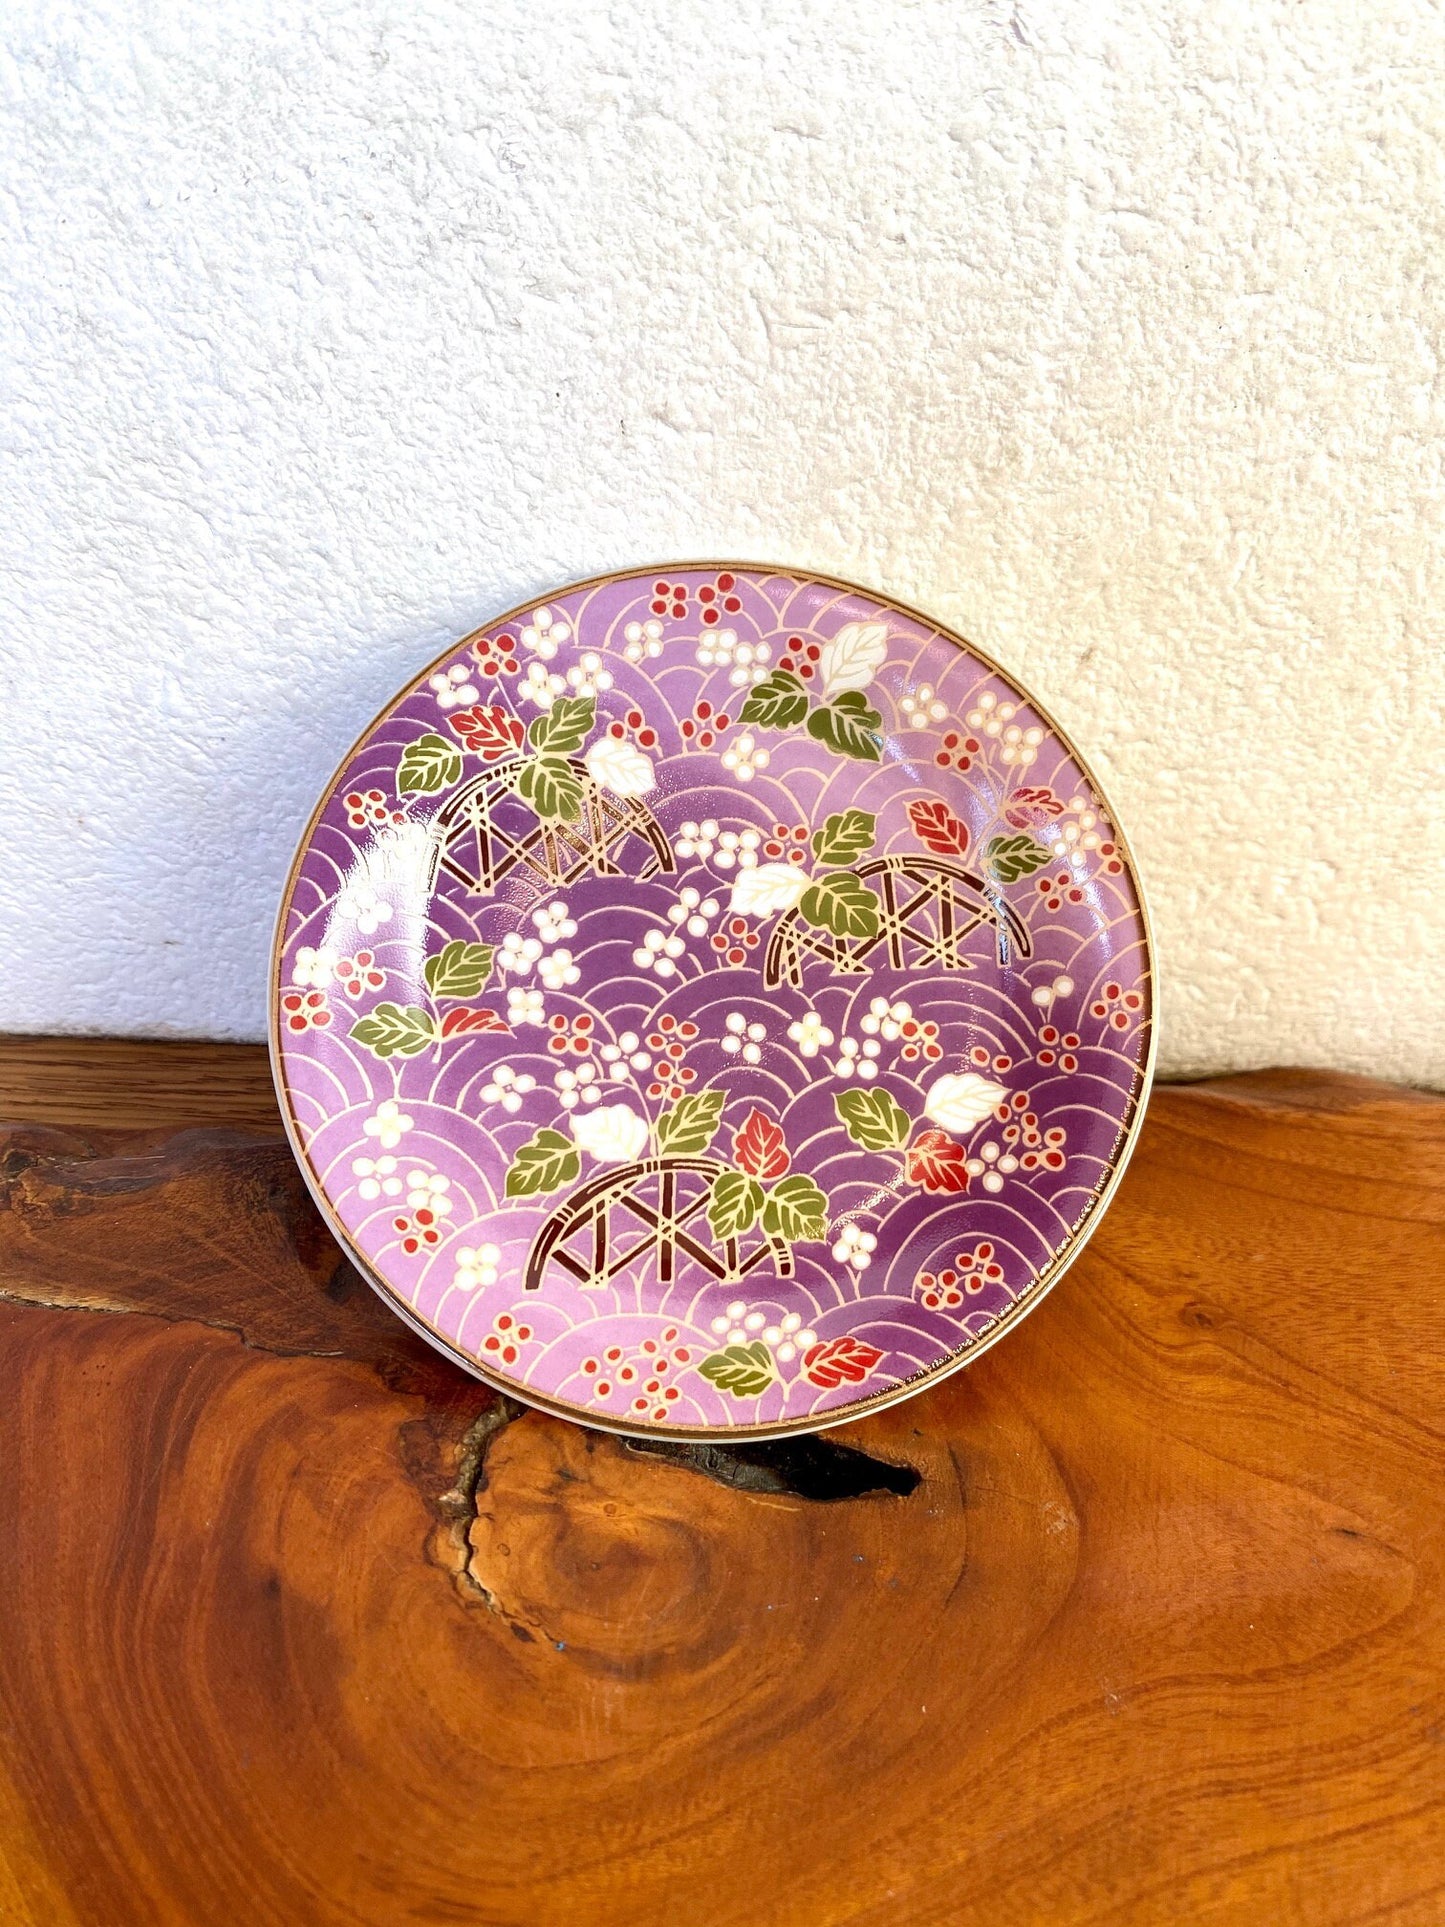 Small Japanese flower mozart with wafu designed Saucer for small Kokedama Size 4.13" diameter x 0.6" height